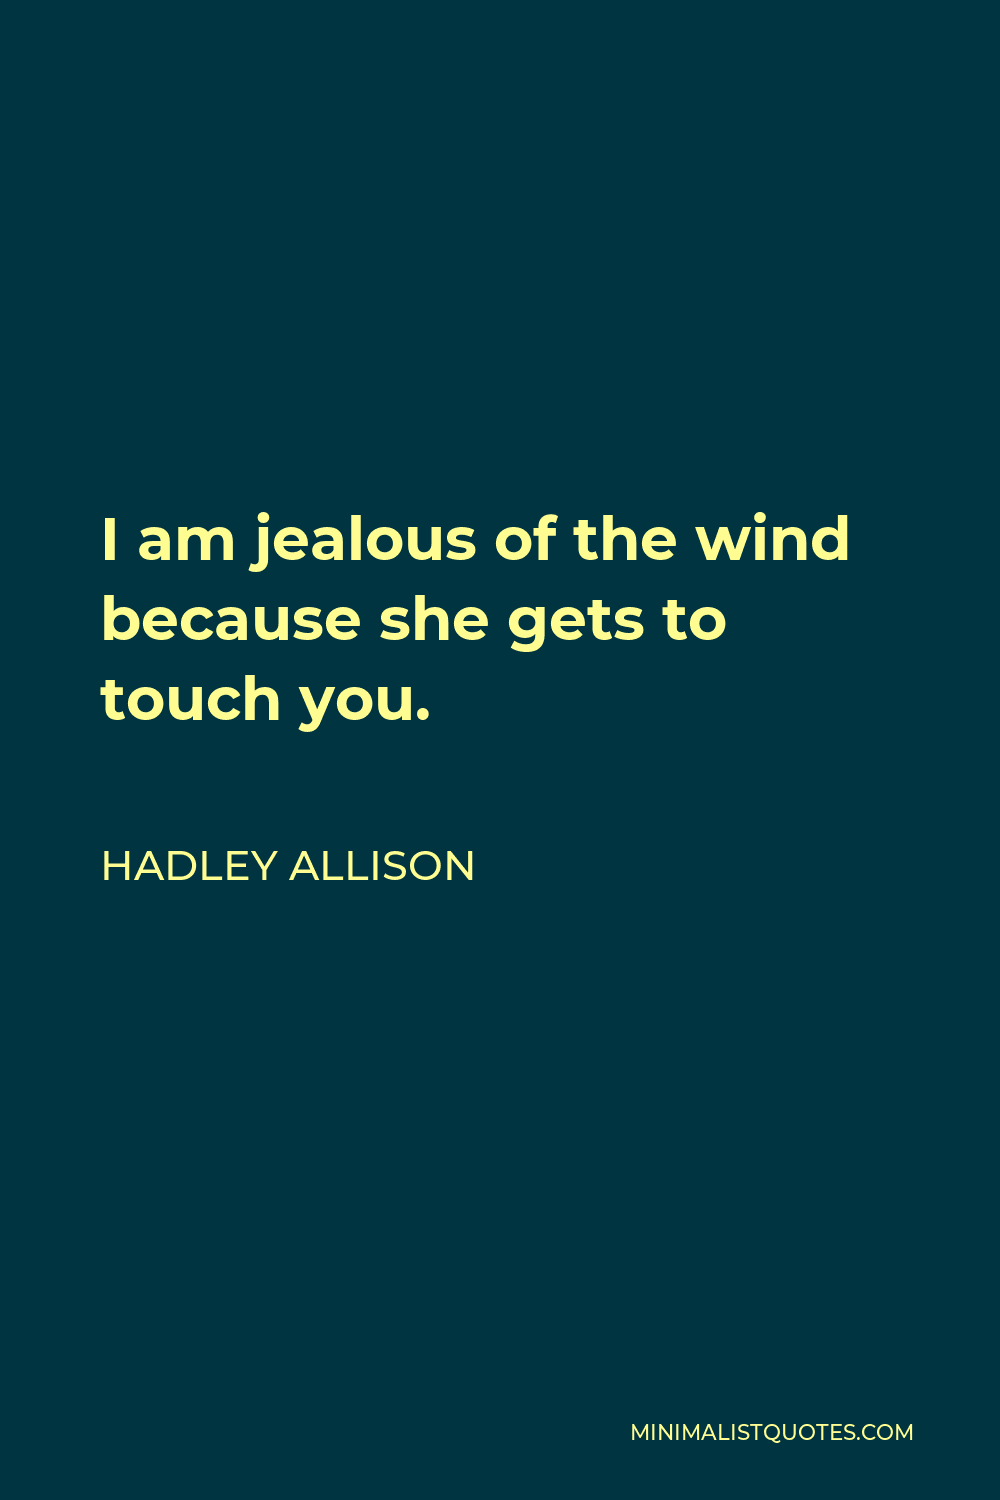 Hadley Allison Quote - I am jealous of the wind because she gets to touch you.